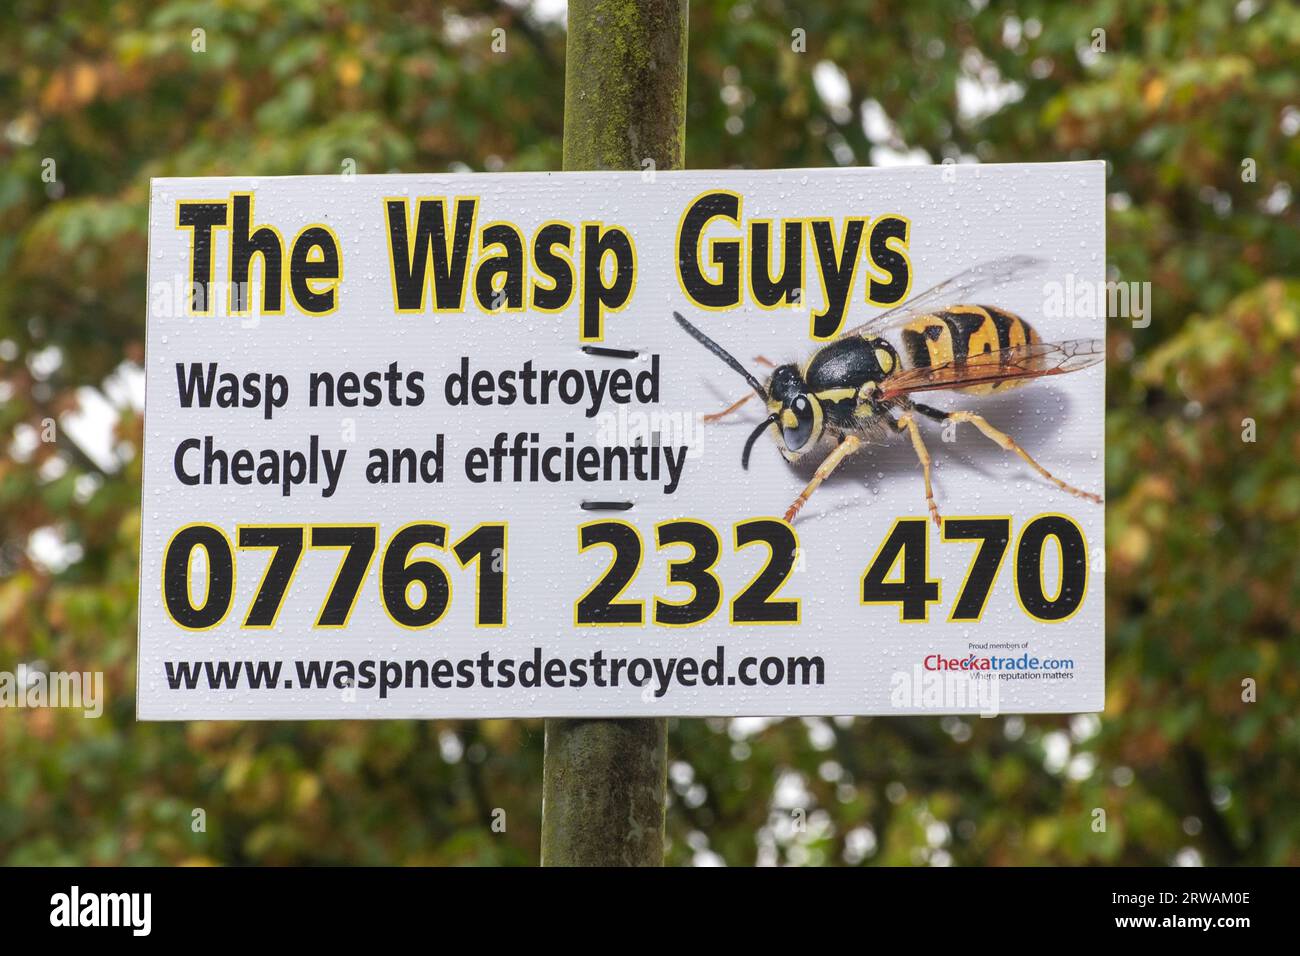 Advert for The Wasp Guys, company that destroys wasp nests Stock Photo